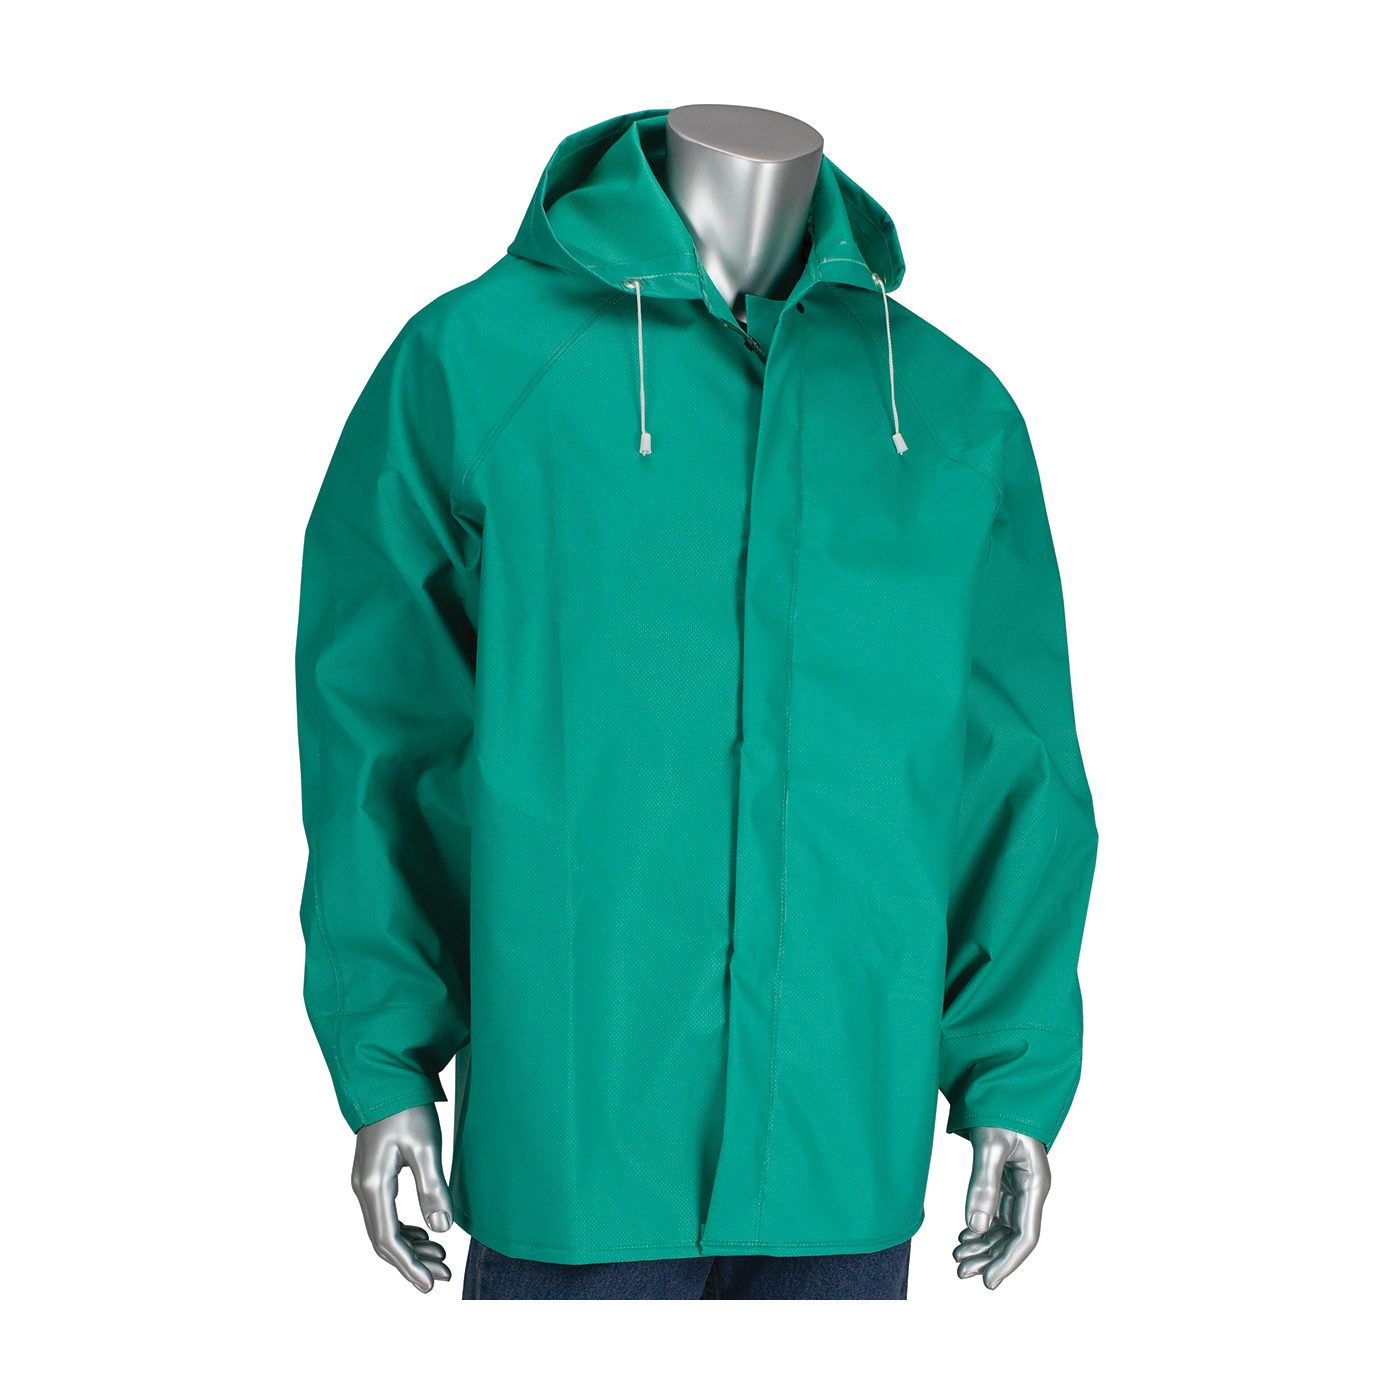 PIP® FALCON™ ChemFR™ 205-420JH/4X Rain Jacket With Hood, 4XL, Green, Nylon/PVC, Resists: Flame and Water, ASTM D6413